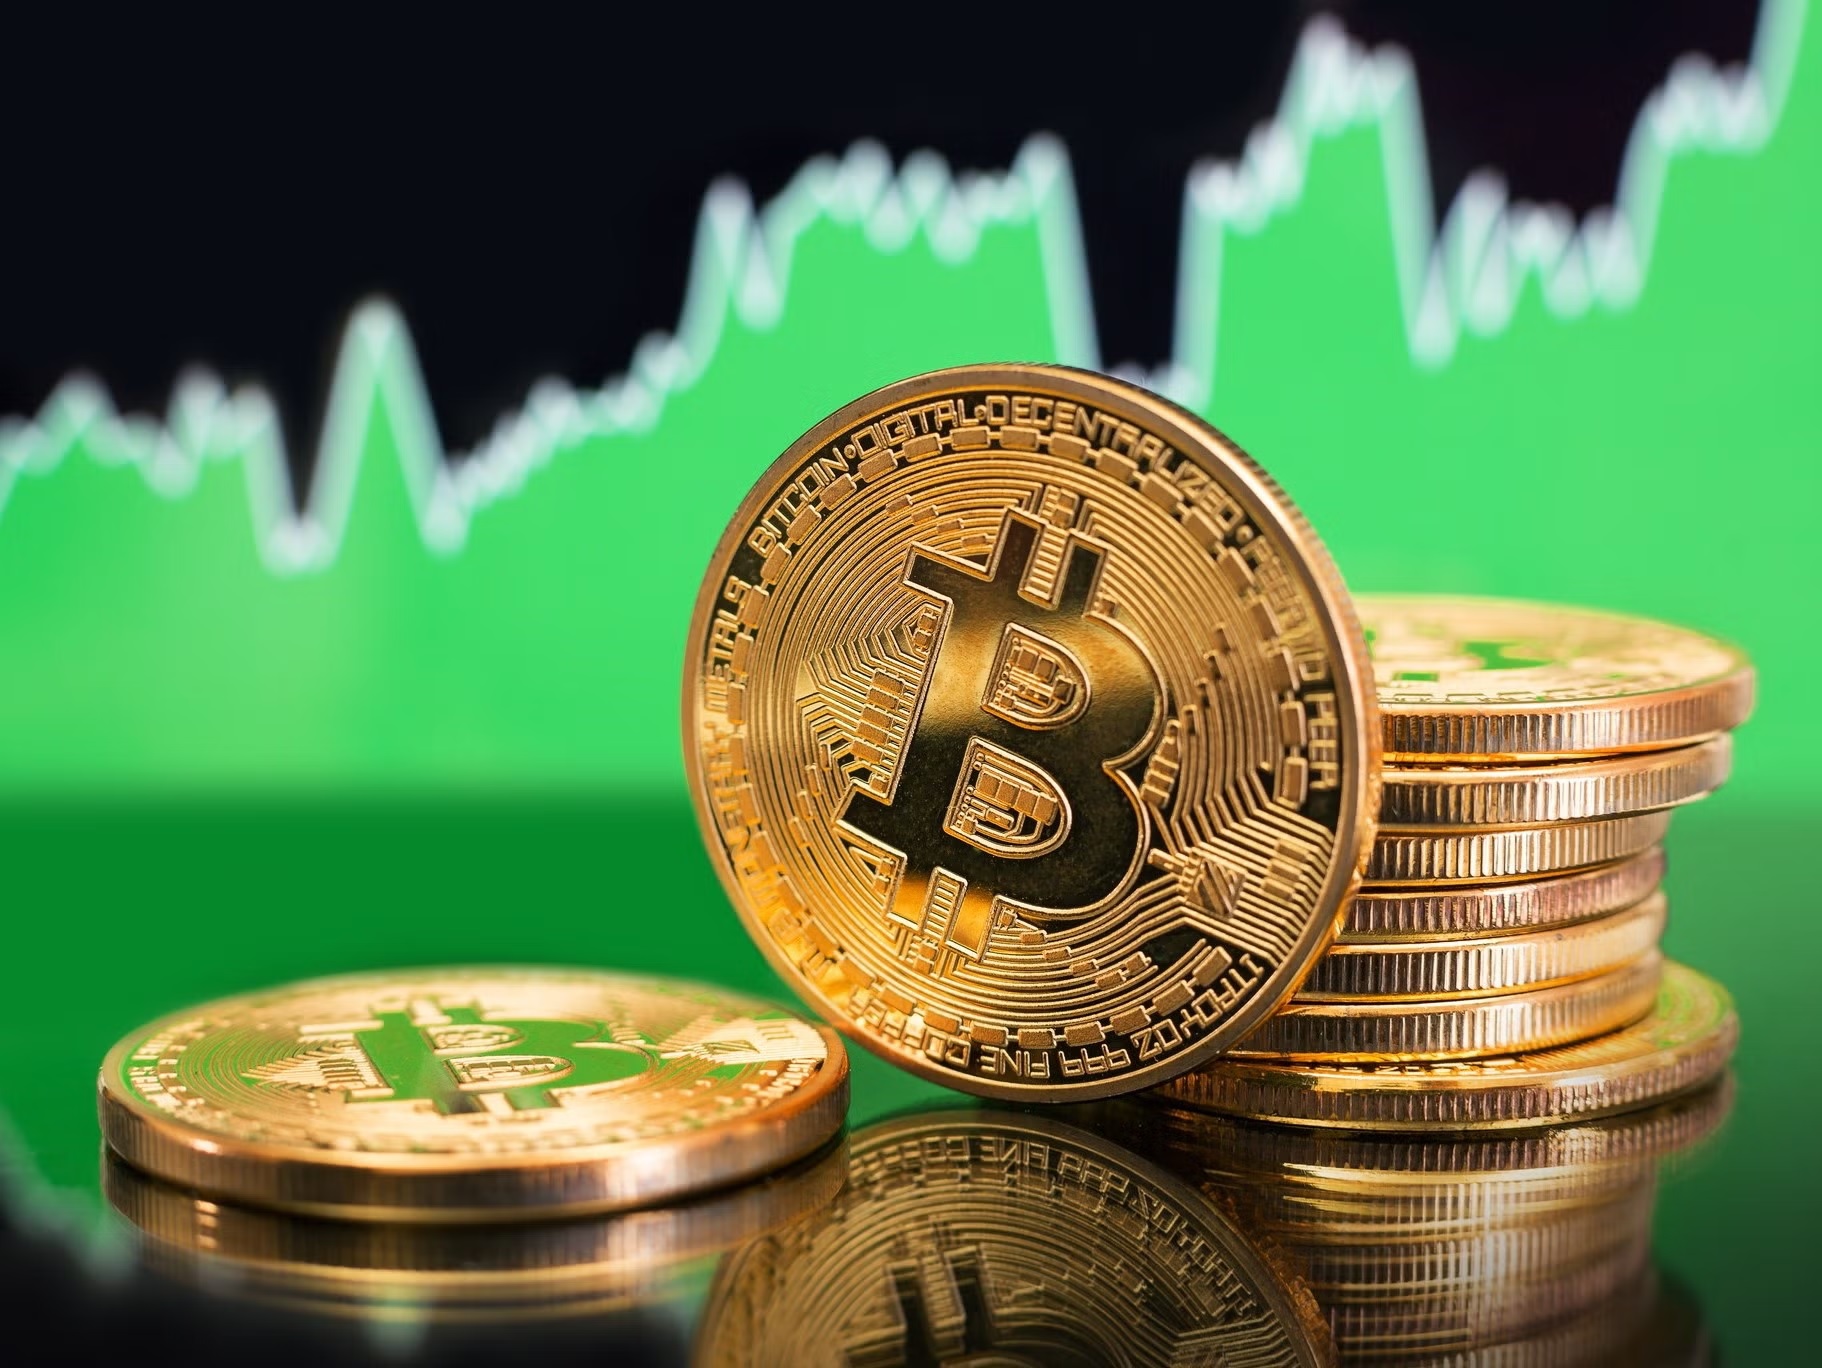 What Will Happen to Bitcoin Price in the Future? Analyst Explains the Condition for BTC to Rise Above $66,000 Again